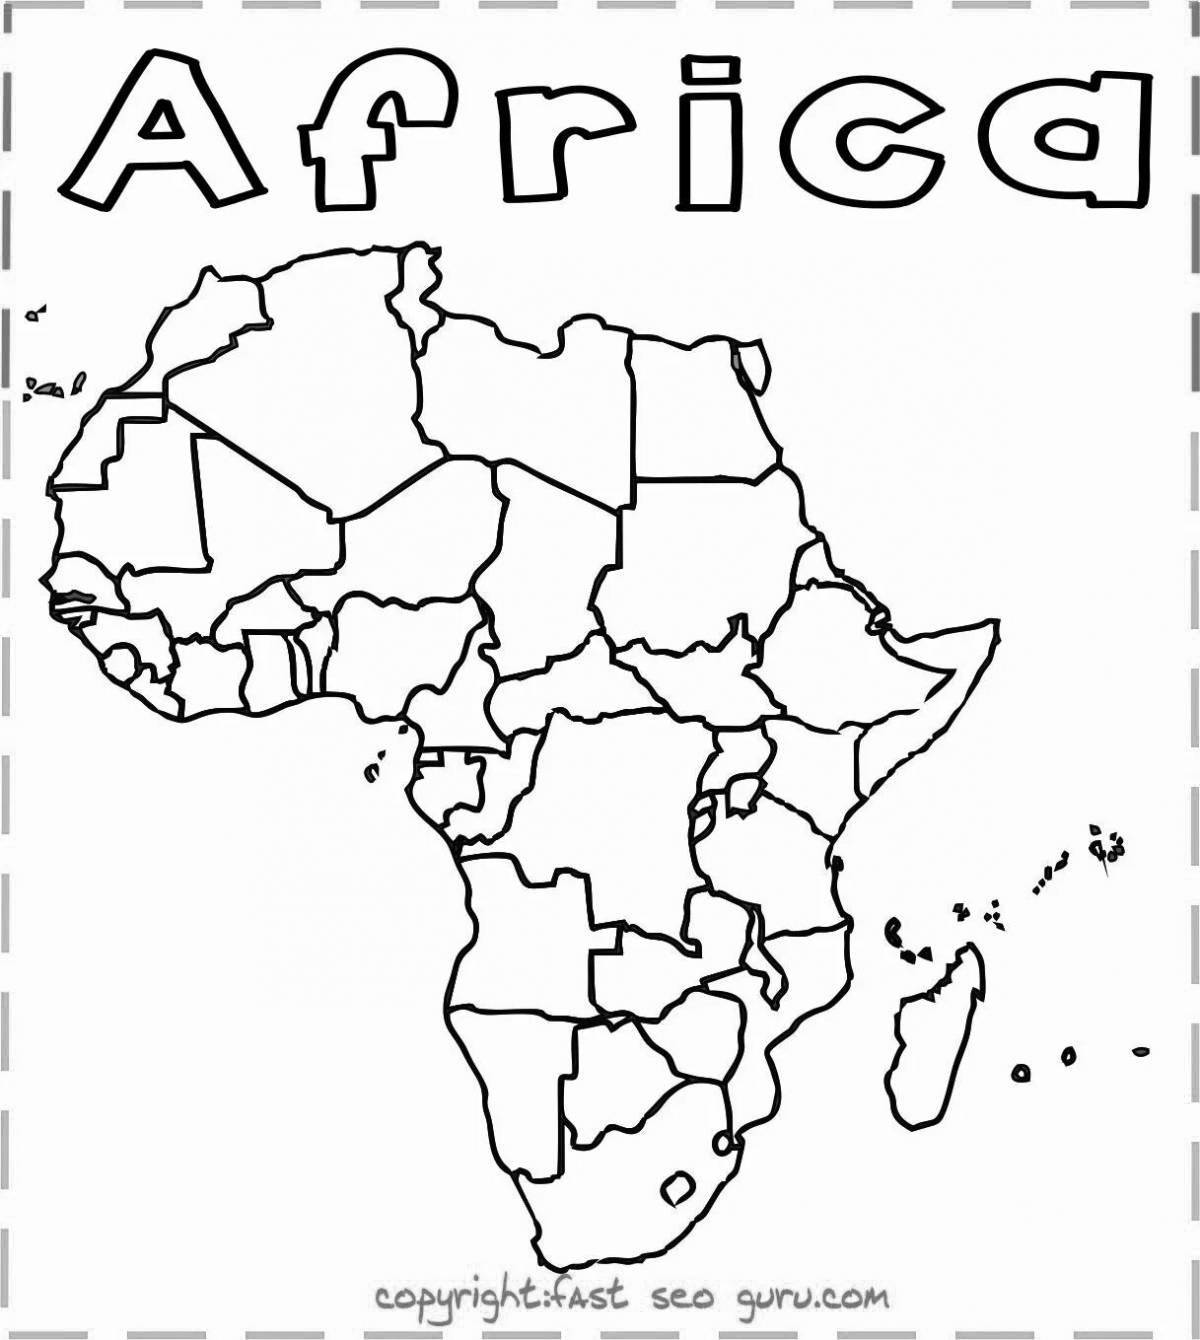 Exciting mainland african coloring book